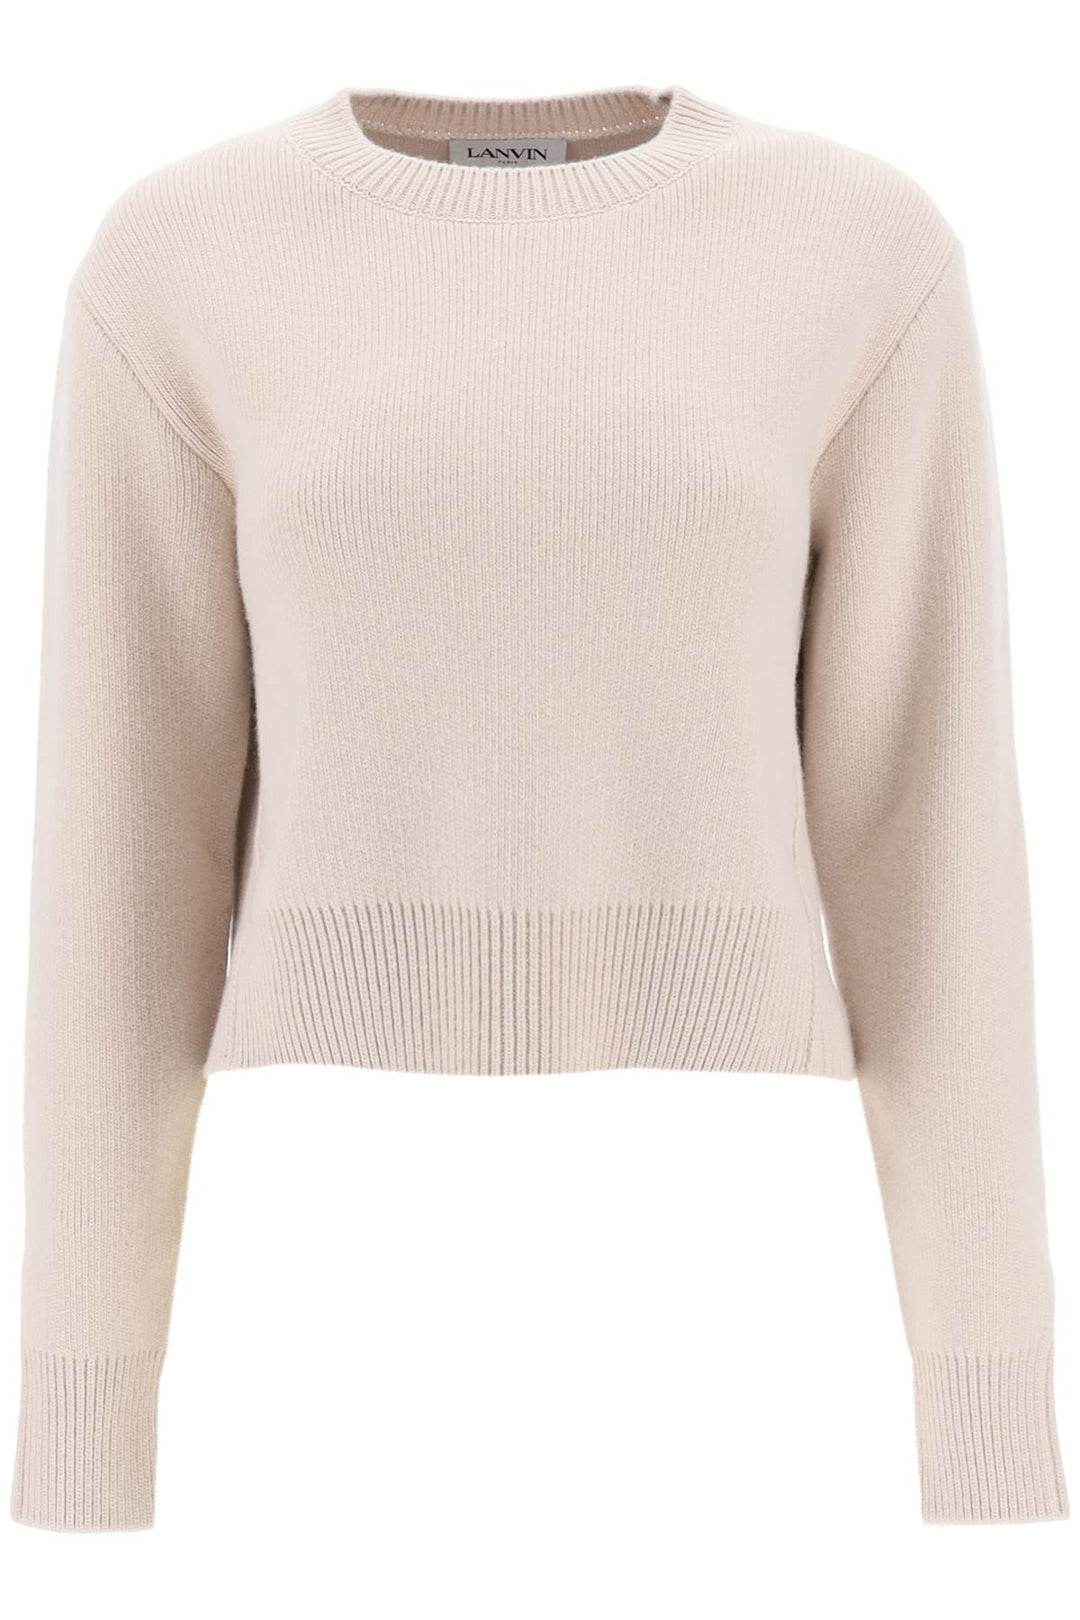 Pullover Cropped In Lana E Cashmere